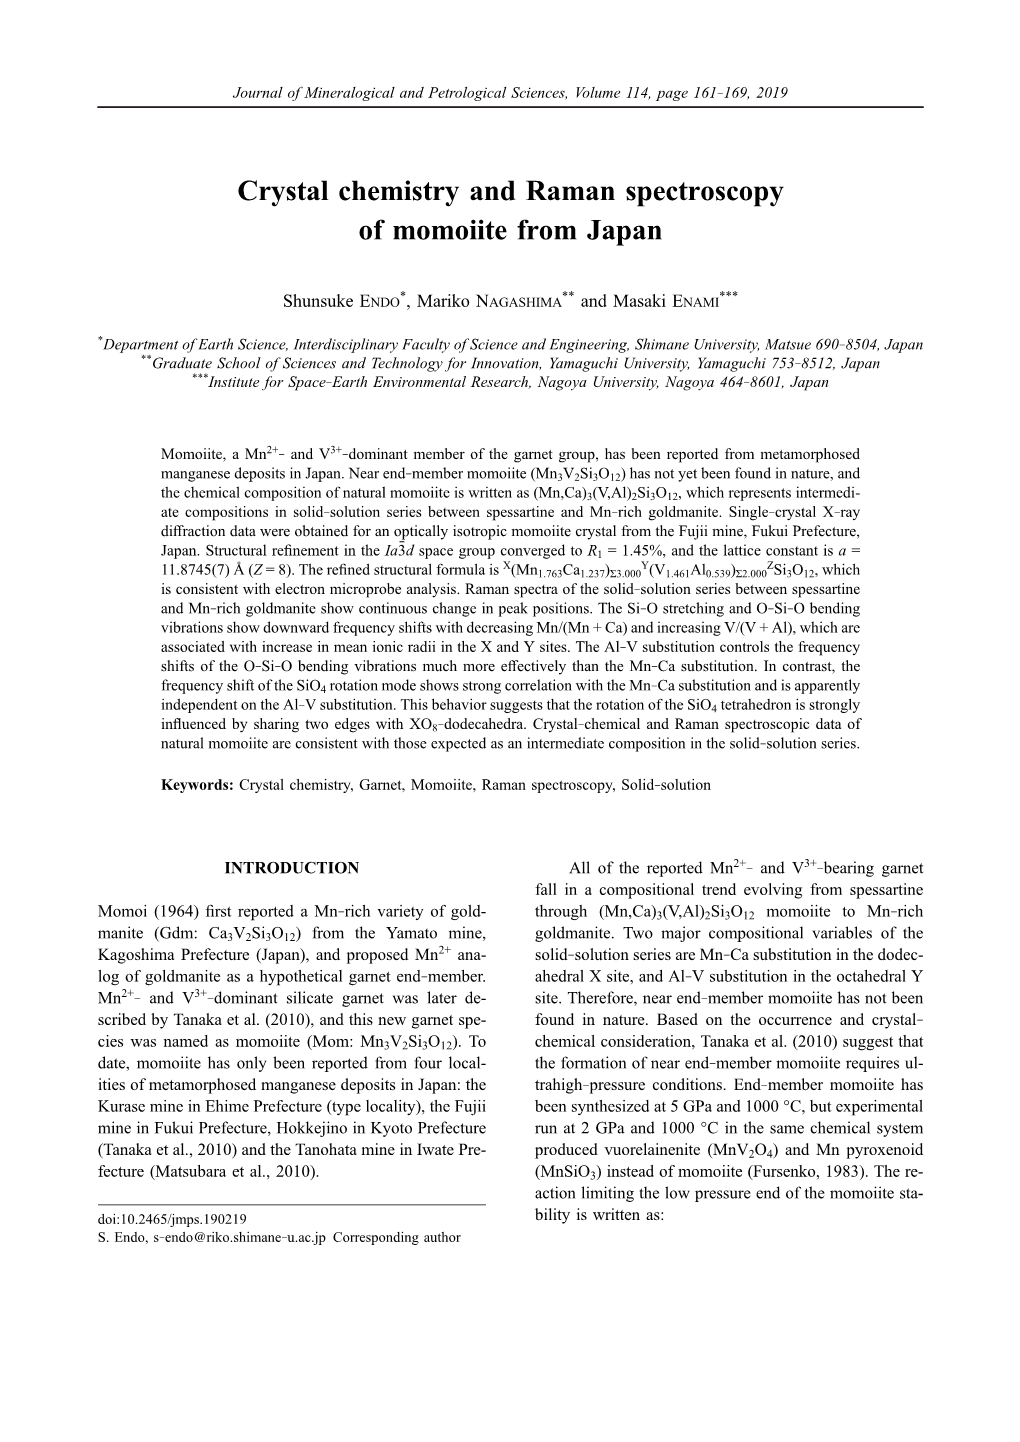 Crystal Chemistry and Raman Spectroscopy of Momoiite from Japan